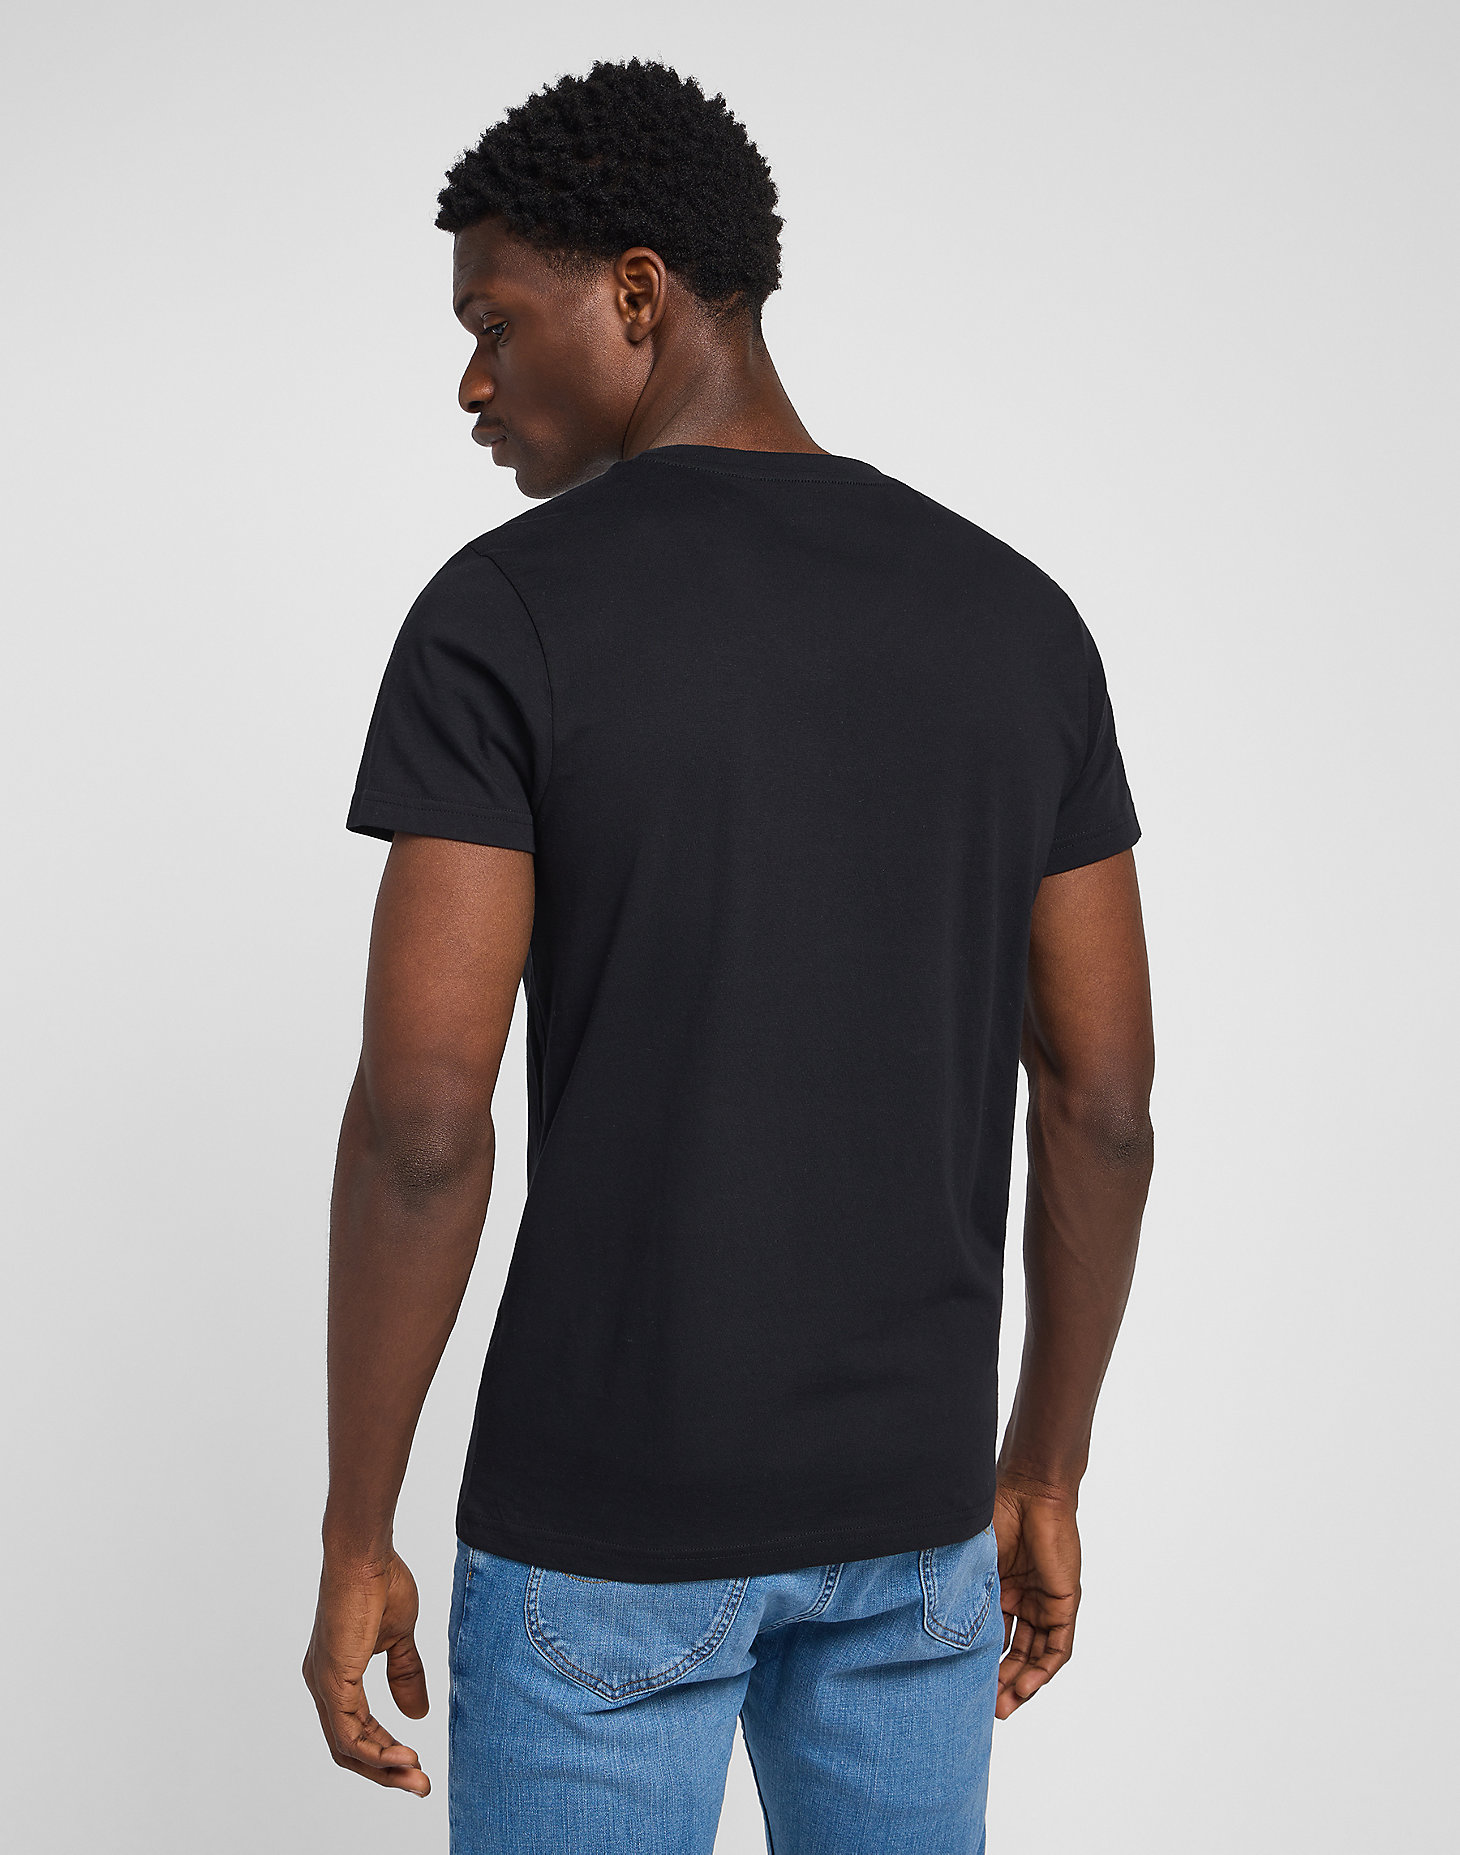 Twin Pack V Neck Tee in Black alternative view 1